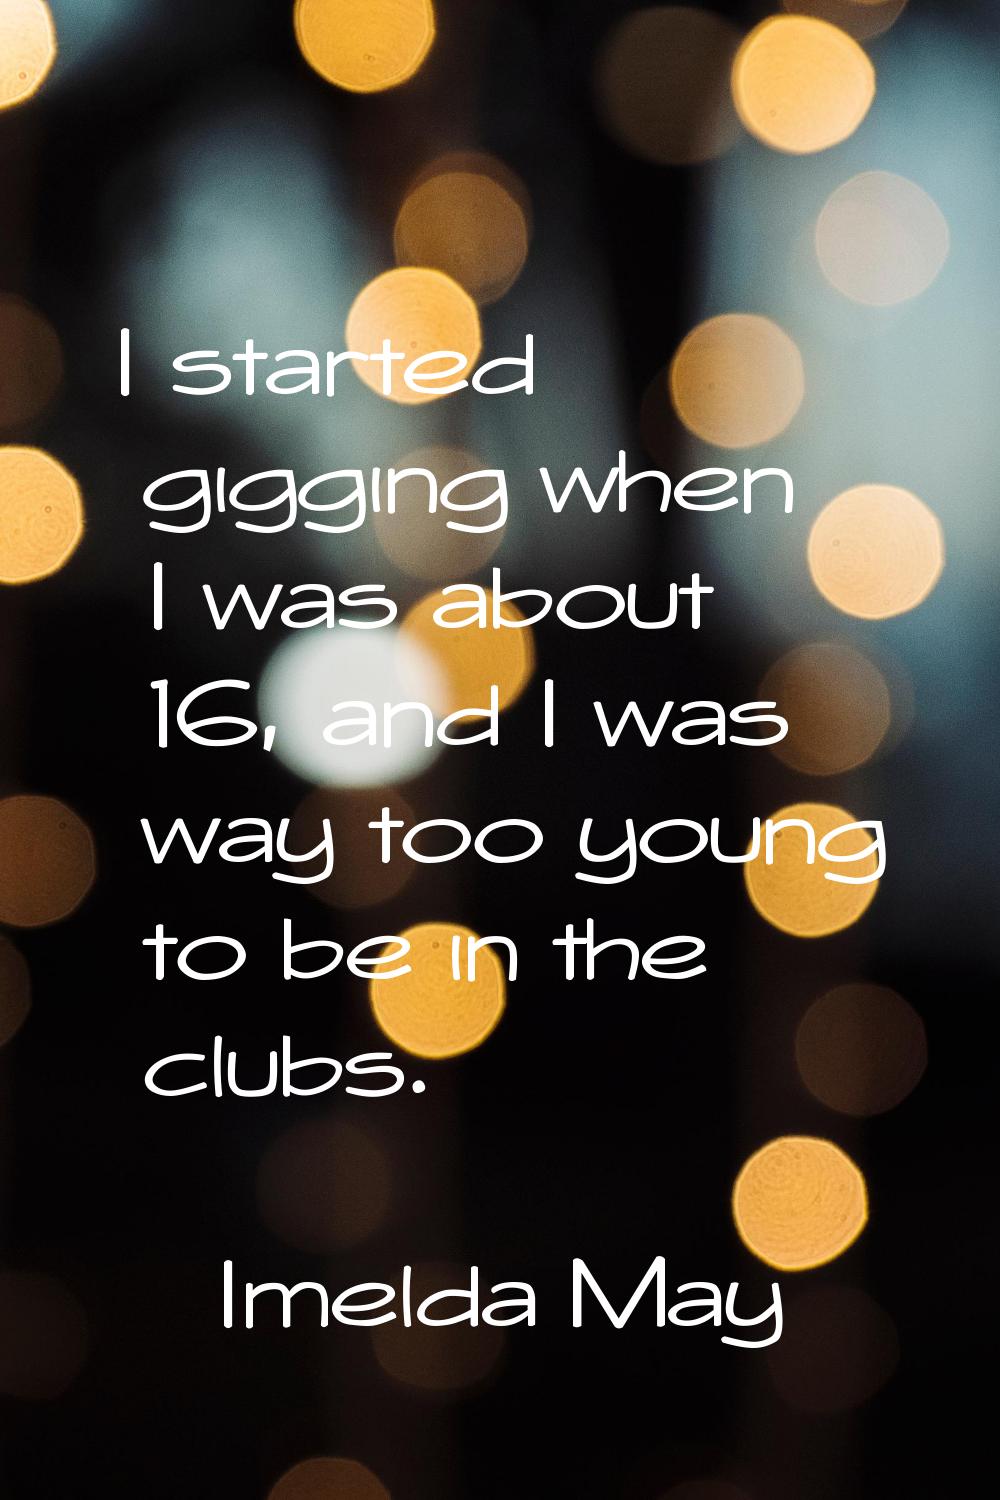 I started gigging when I was about 16, and I was way too young to be in the clubs.